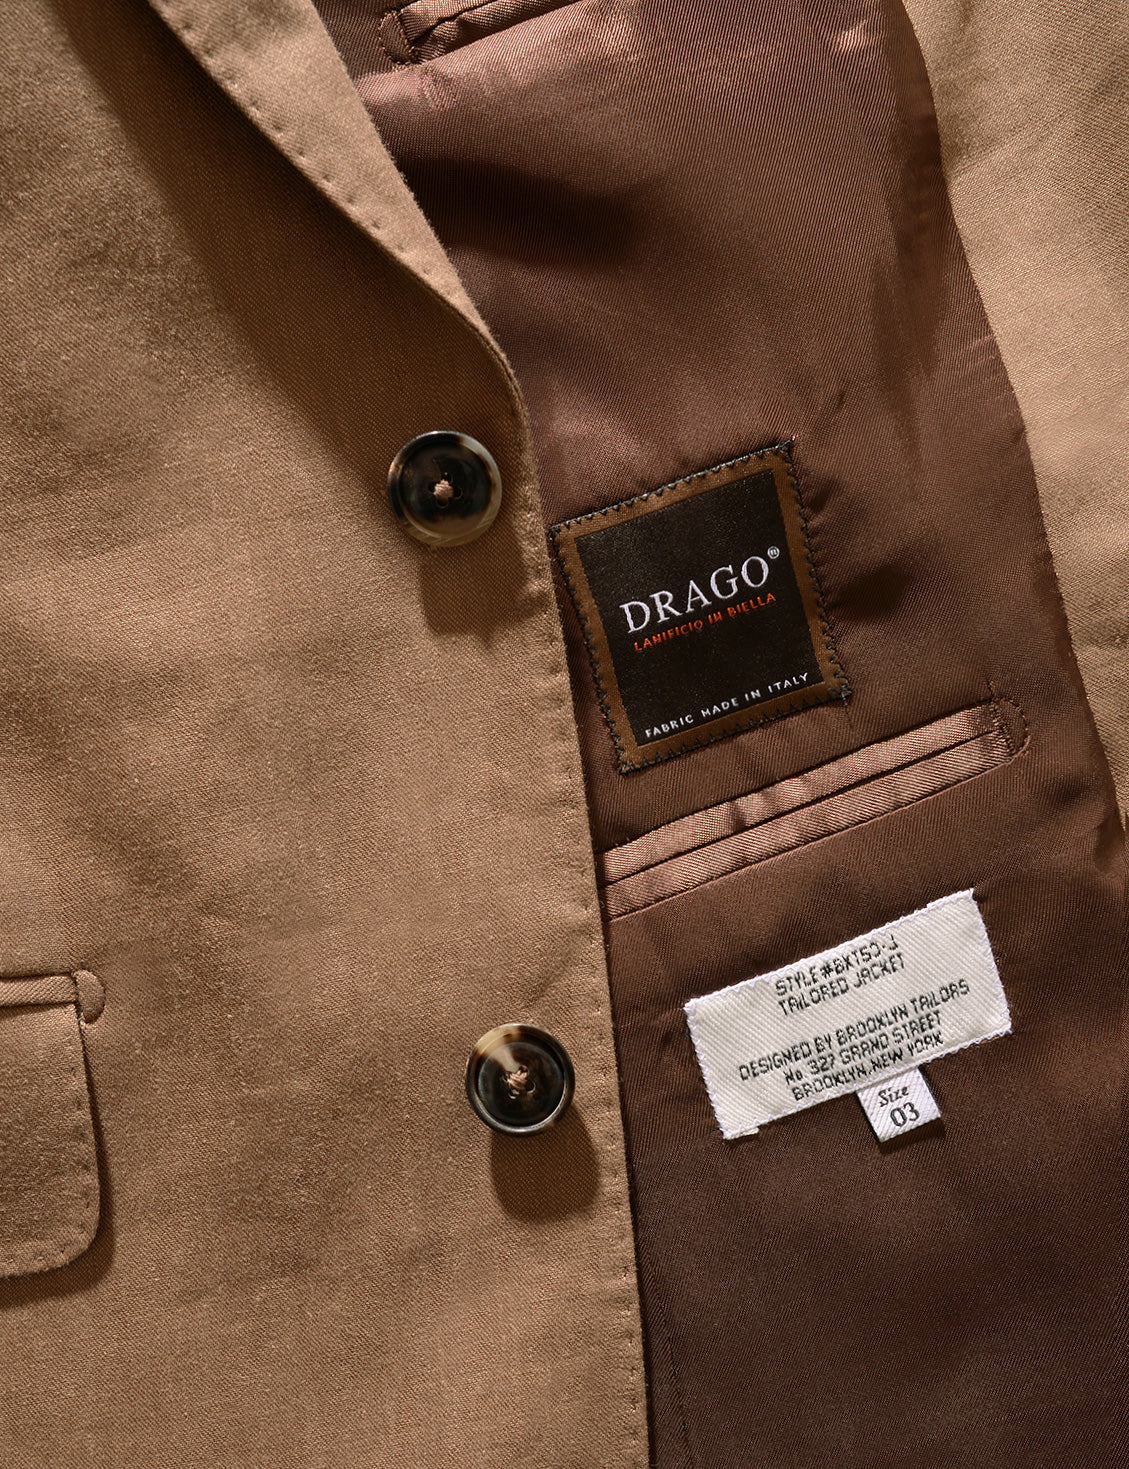 Detail shot of Brooklyn Tailors BKT50 Tailored Jacket in Wool Linen - Sahara showing Drago label and buttons